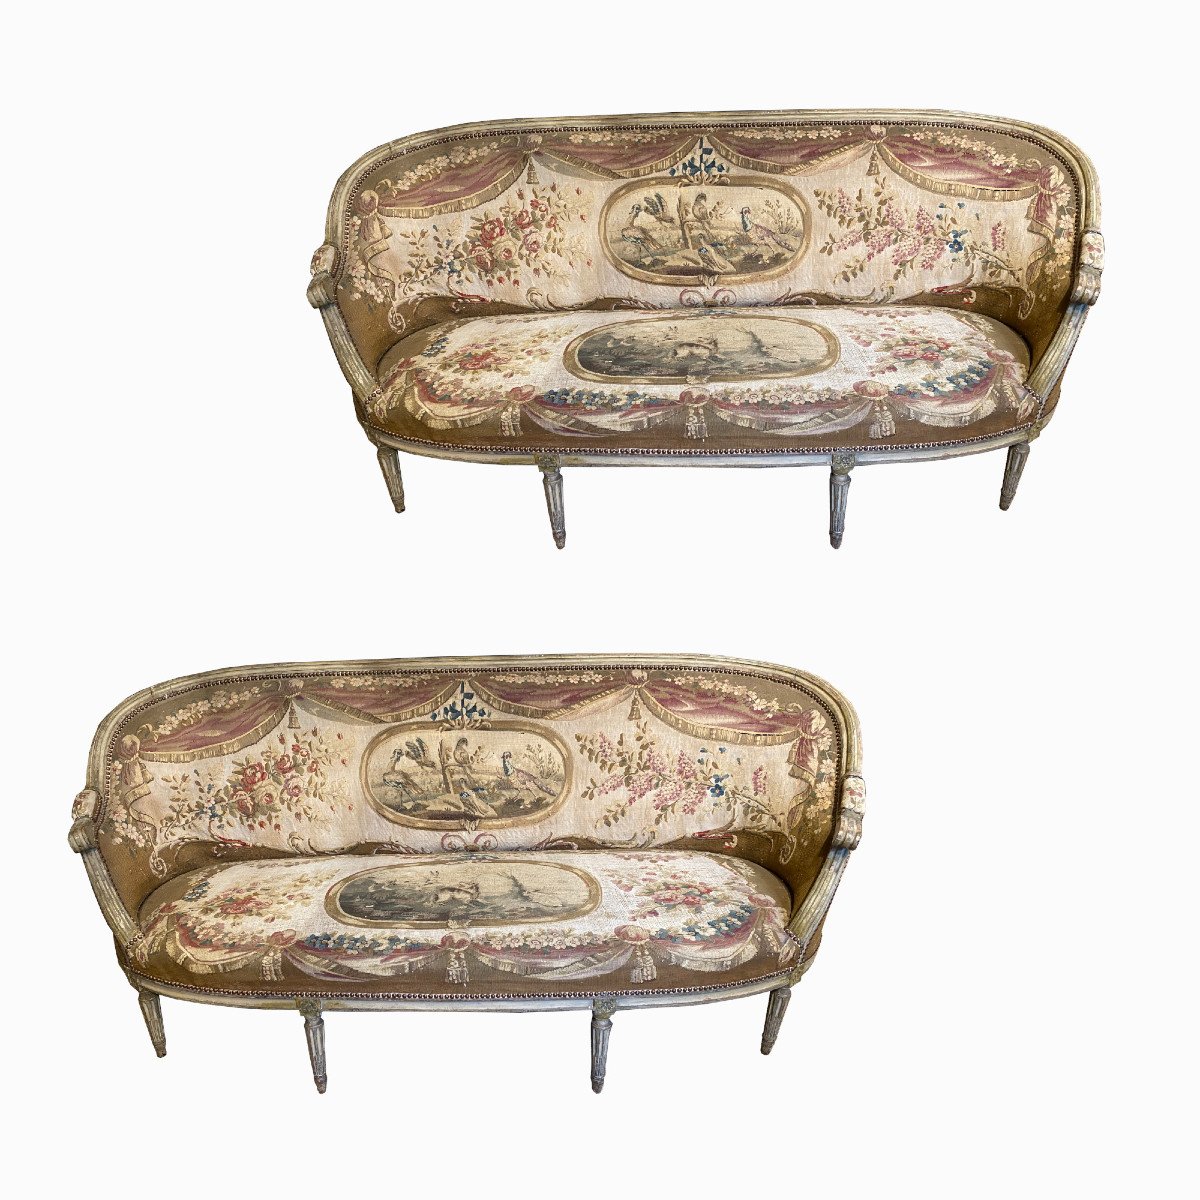 Pair Of Louis XVI Period Sofas, Covered With Tapestries